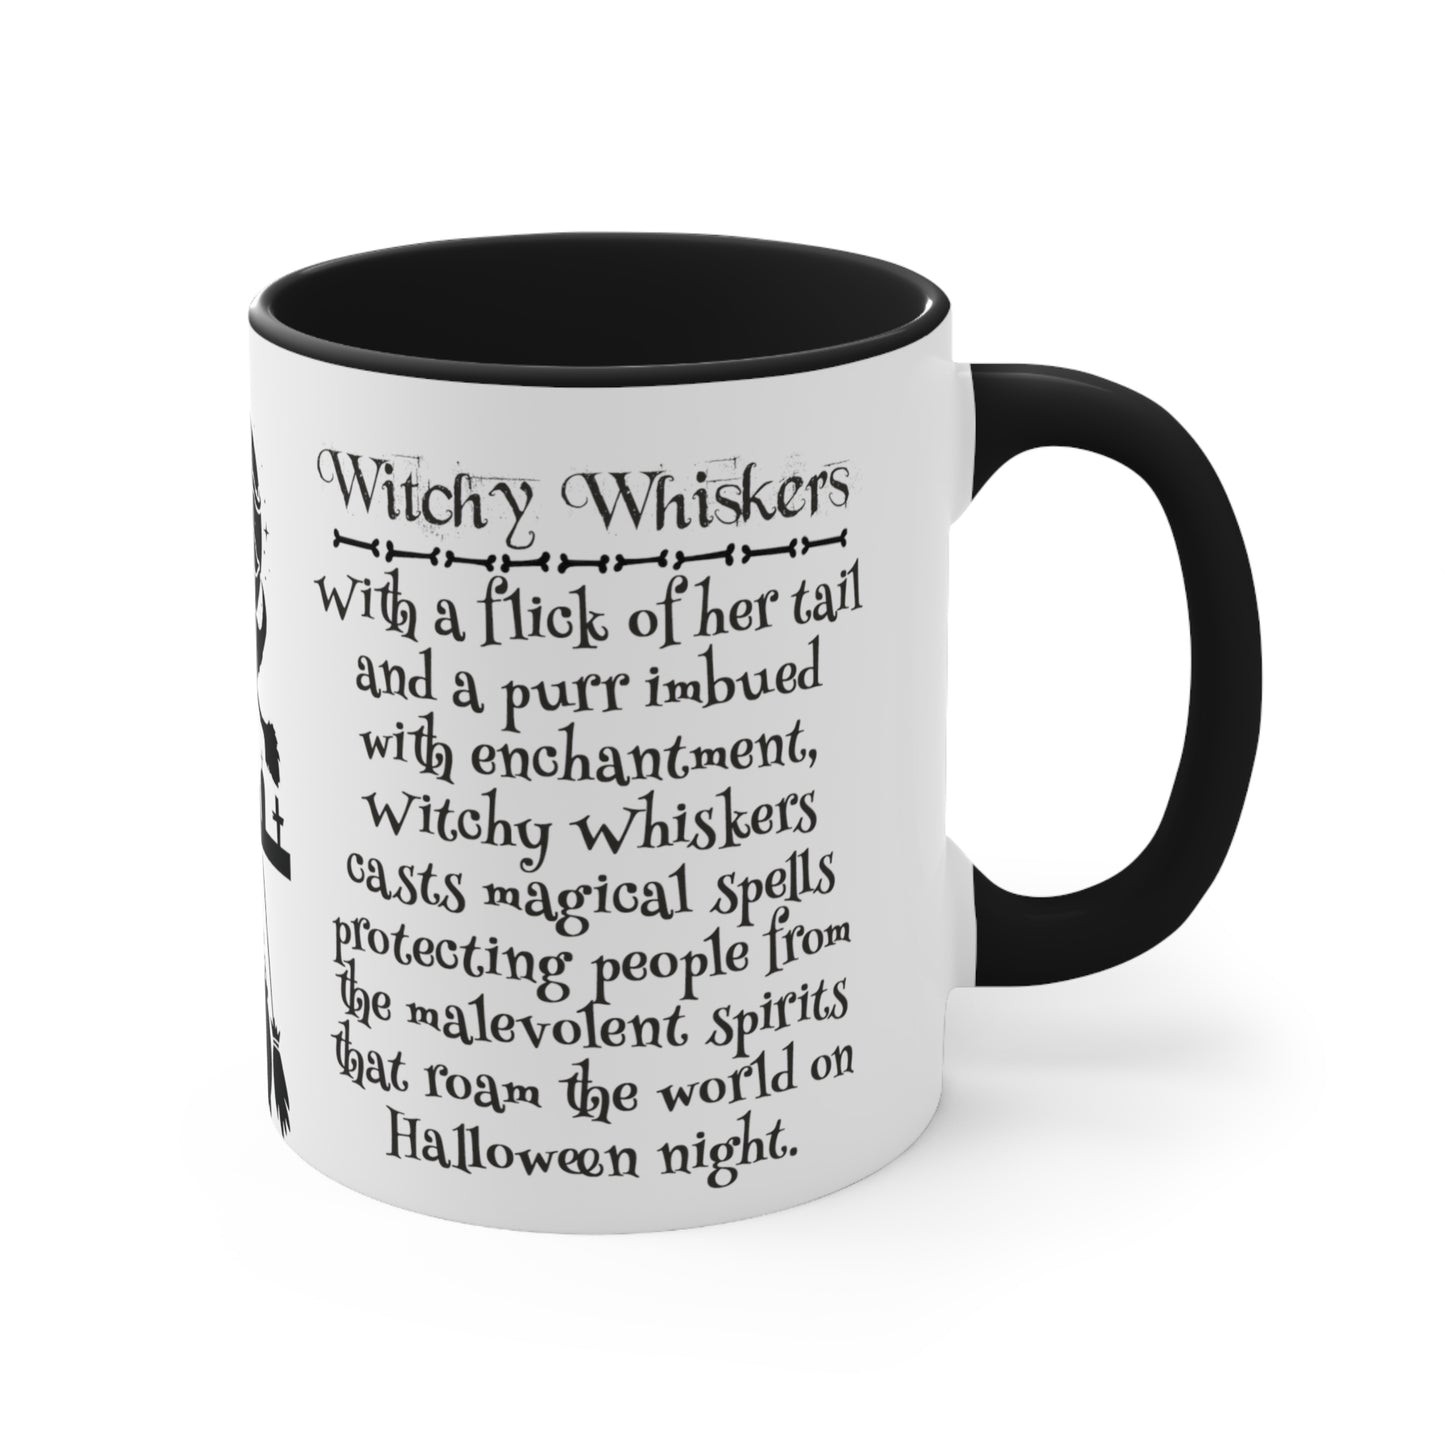 Witchy Whiskers™ Collectible Halloween Gift Mug